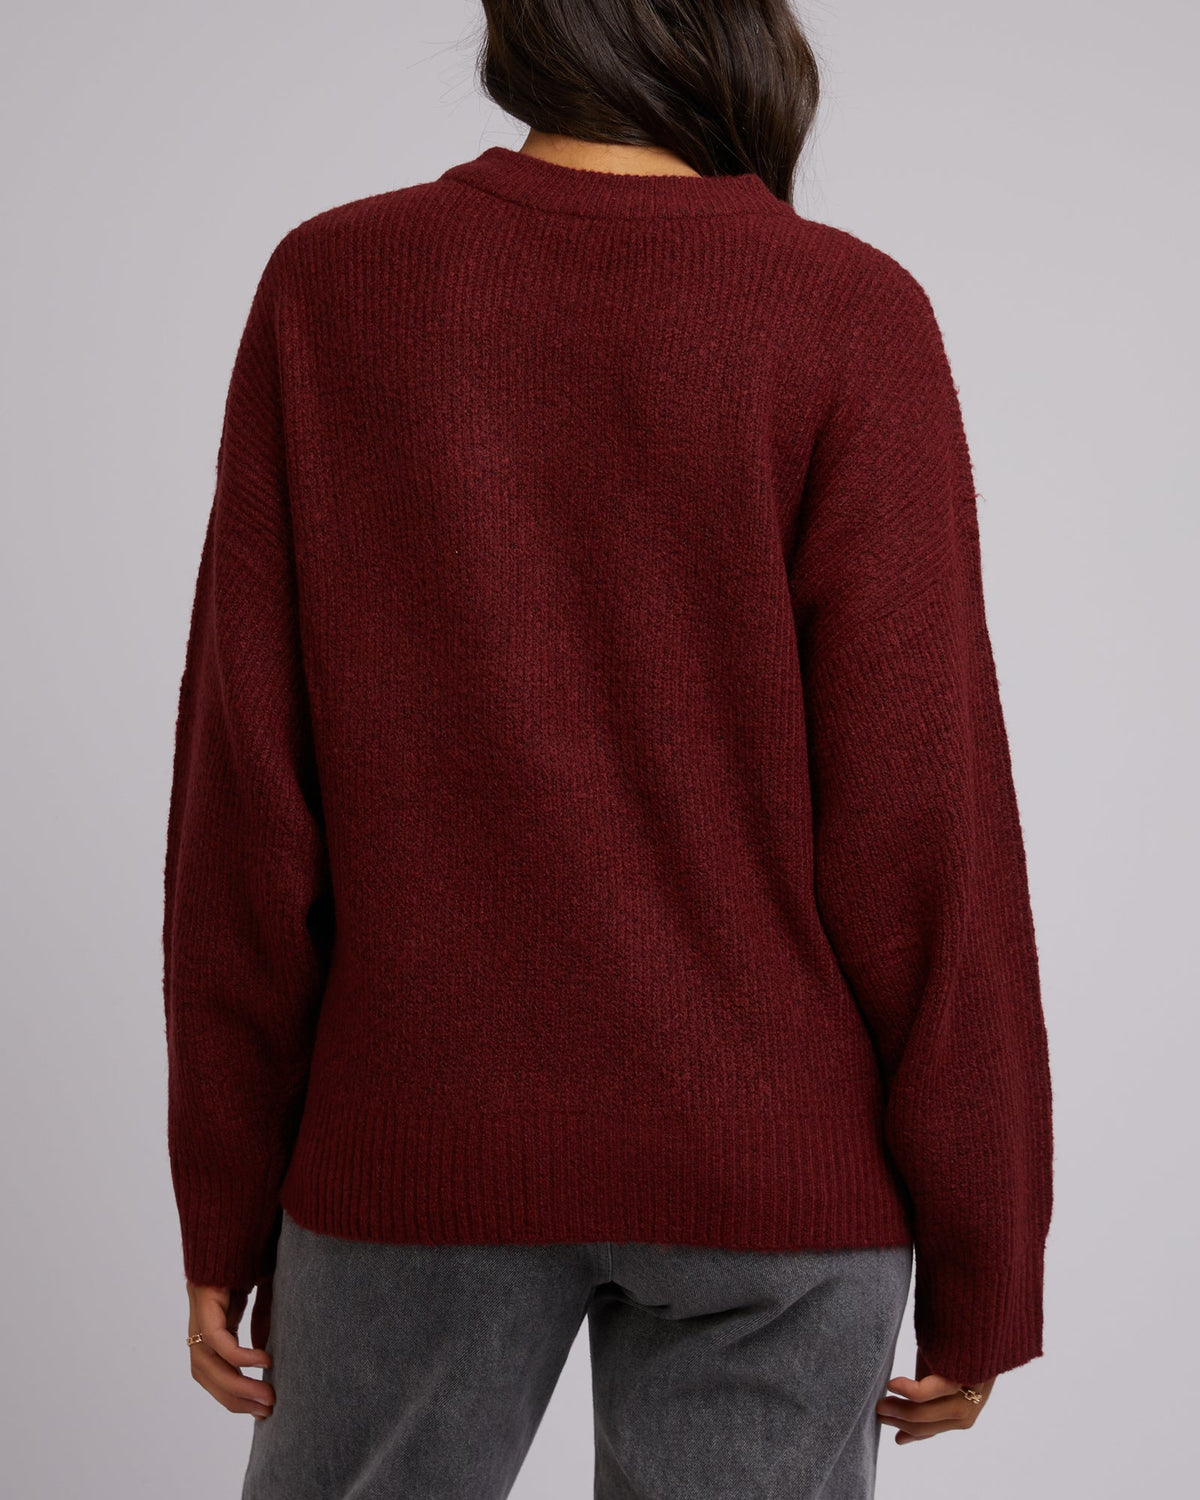 All About Eve-Kendal Knit Port-Edge Clothing